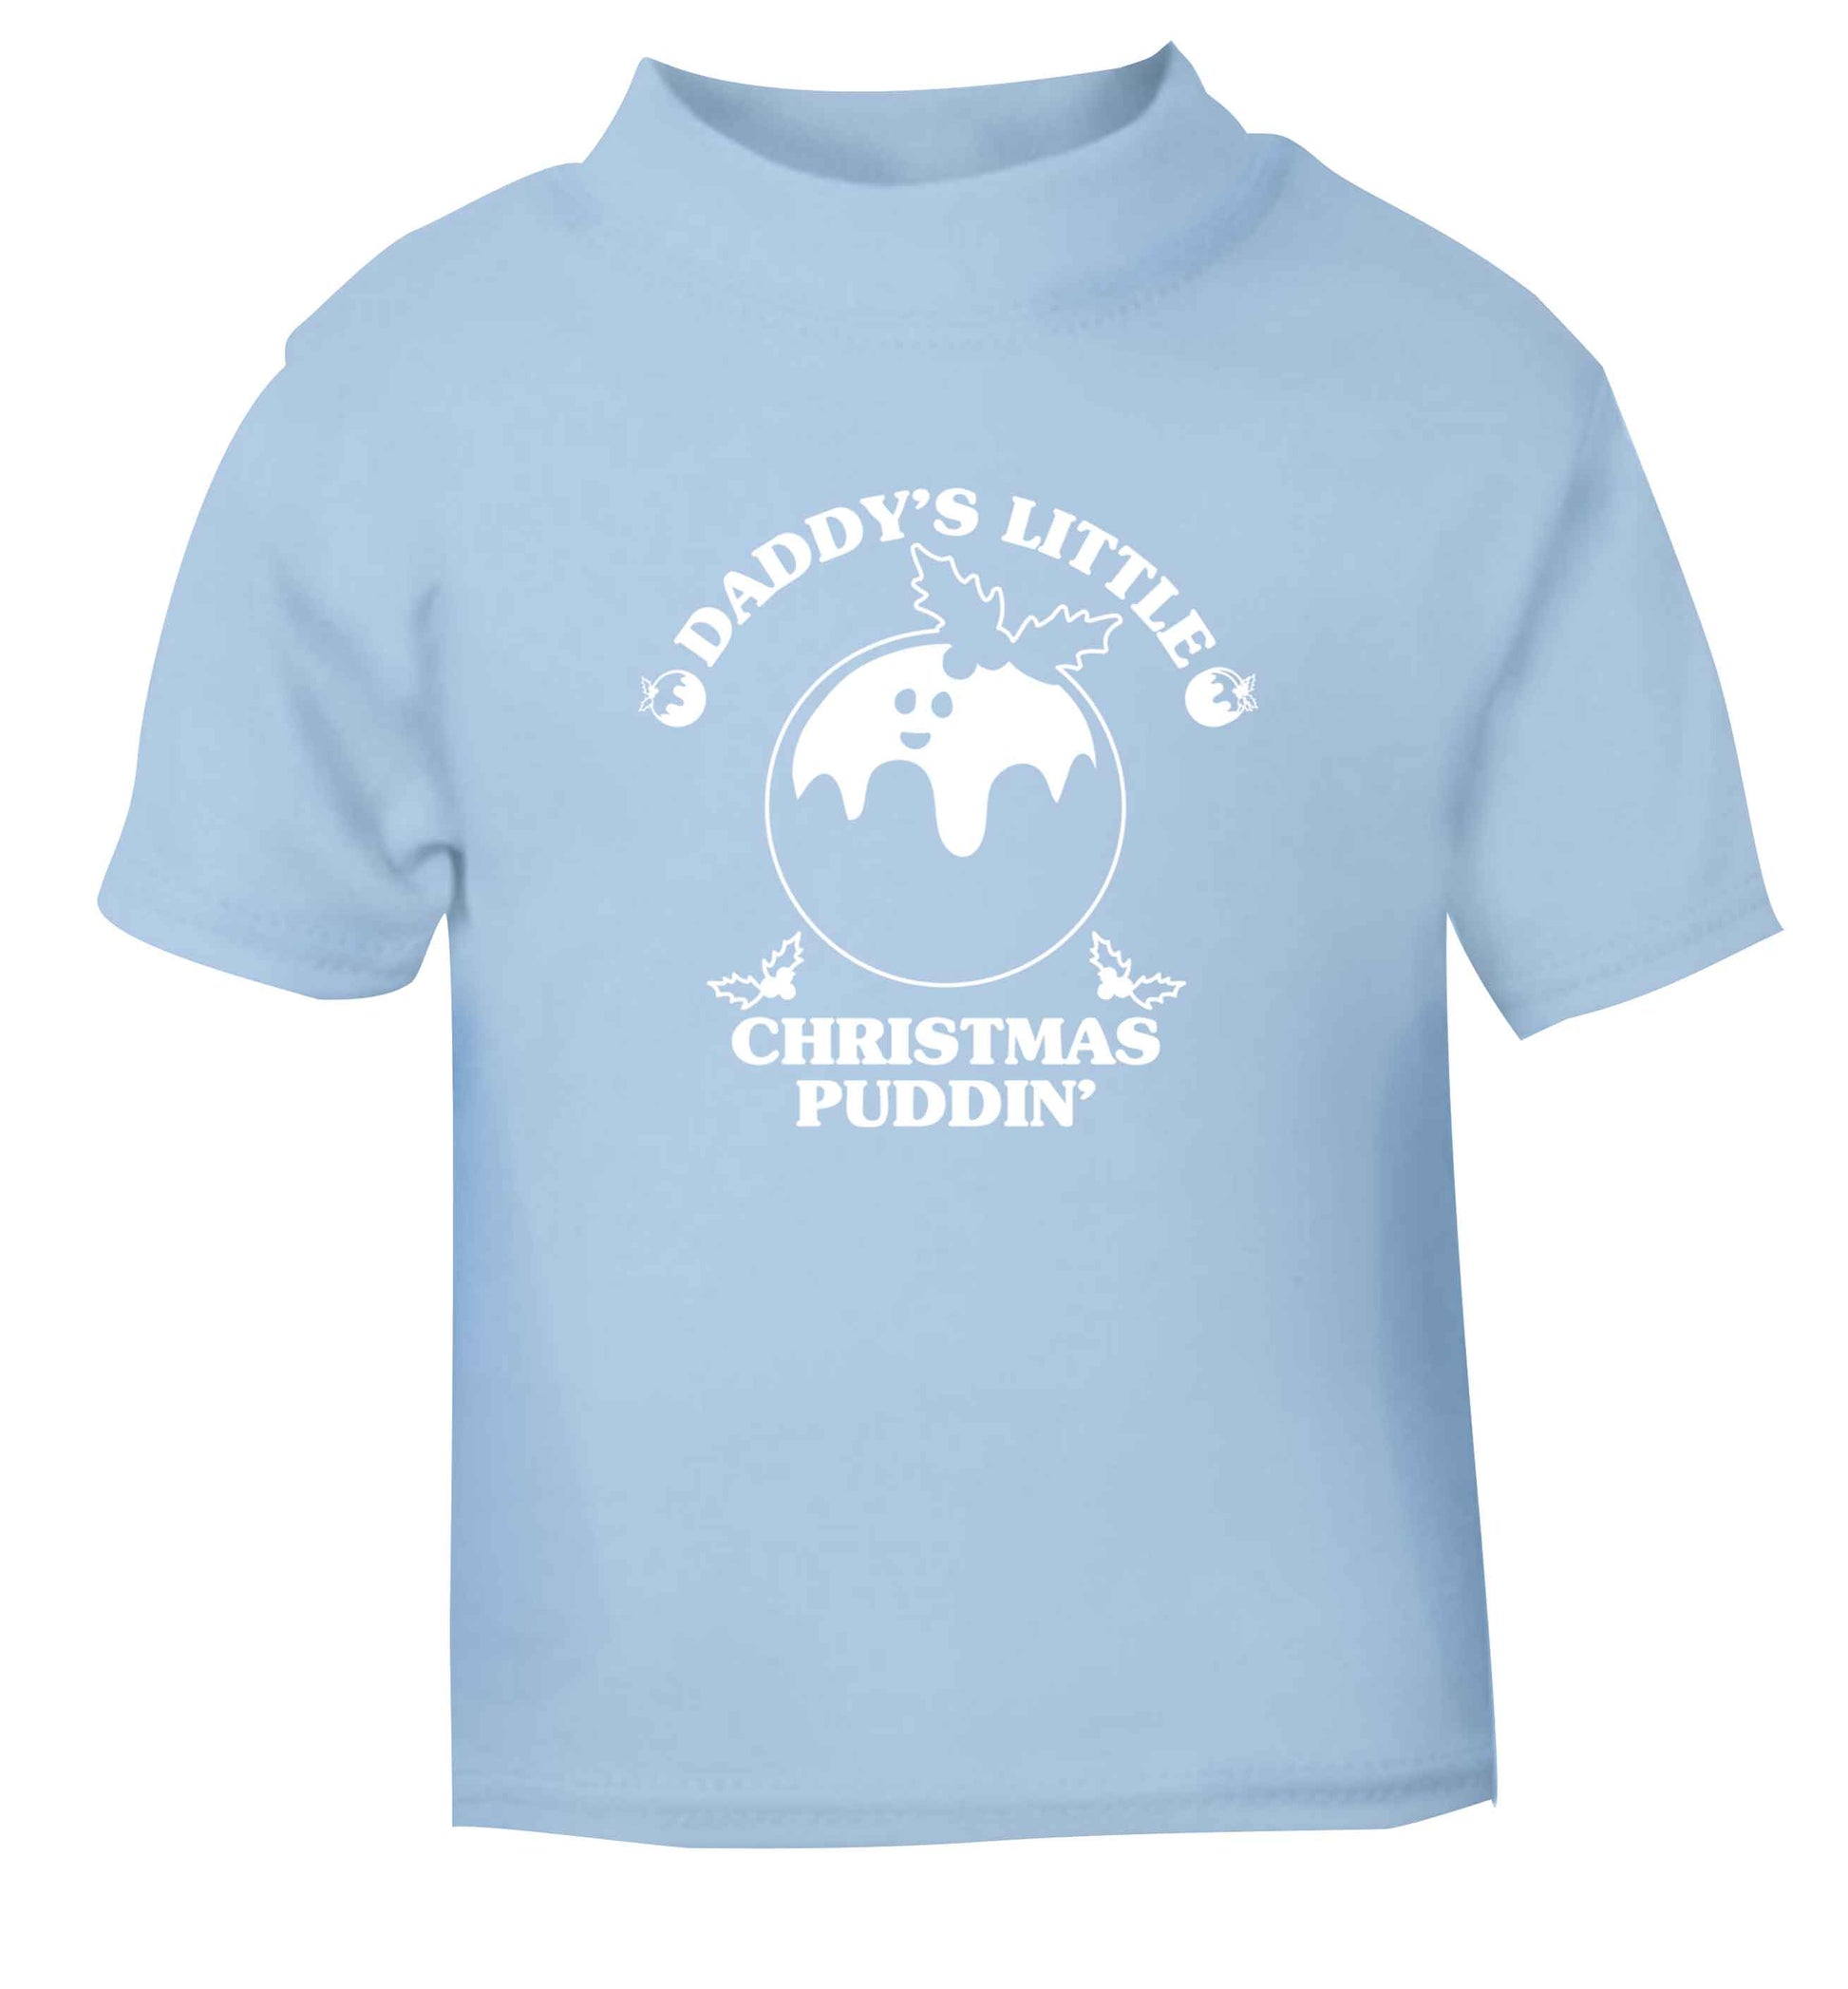 Daddy's little Christmas puddin' light blue Baby Toddler Tshirt 2 Years